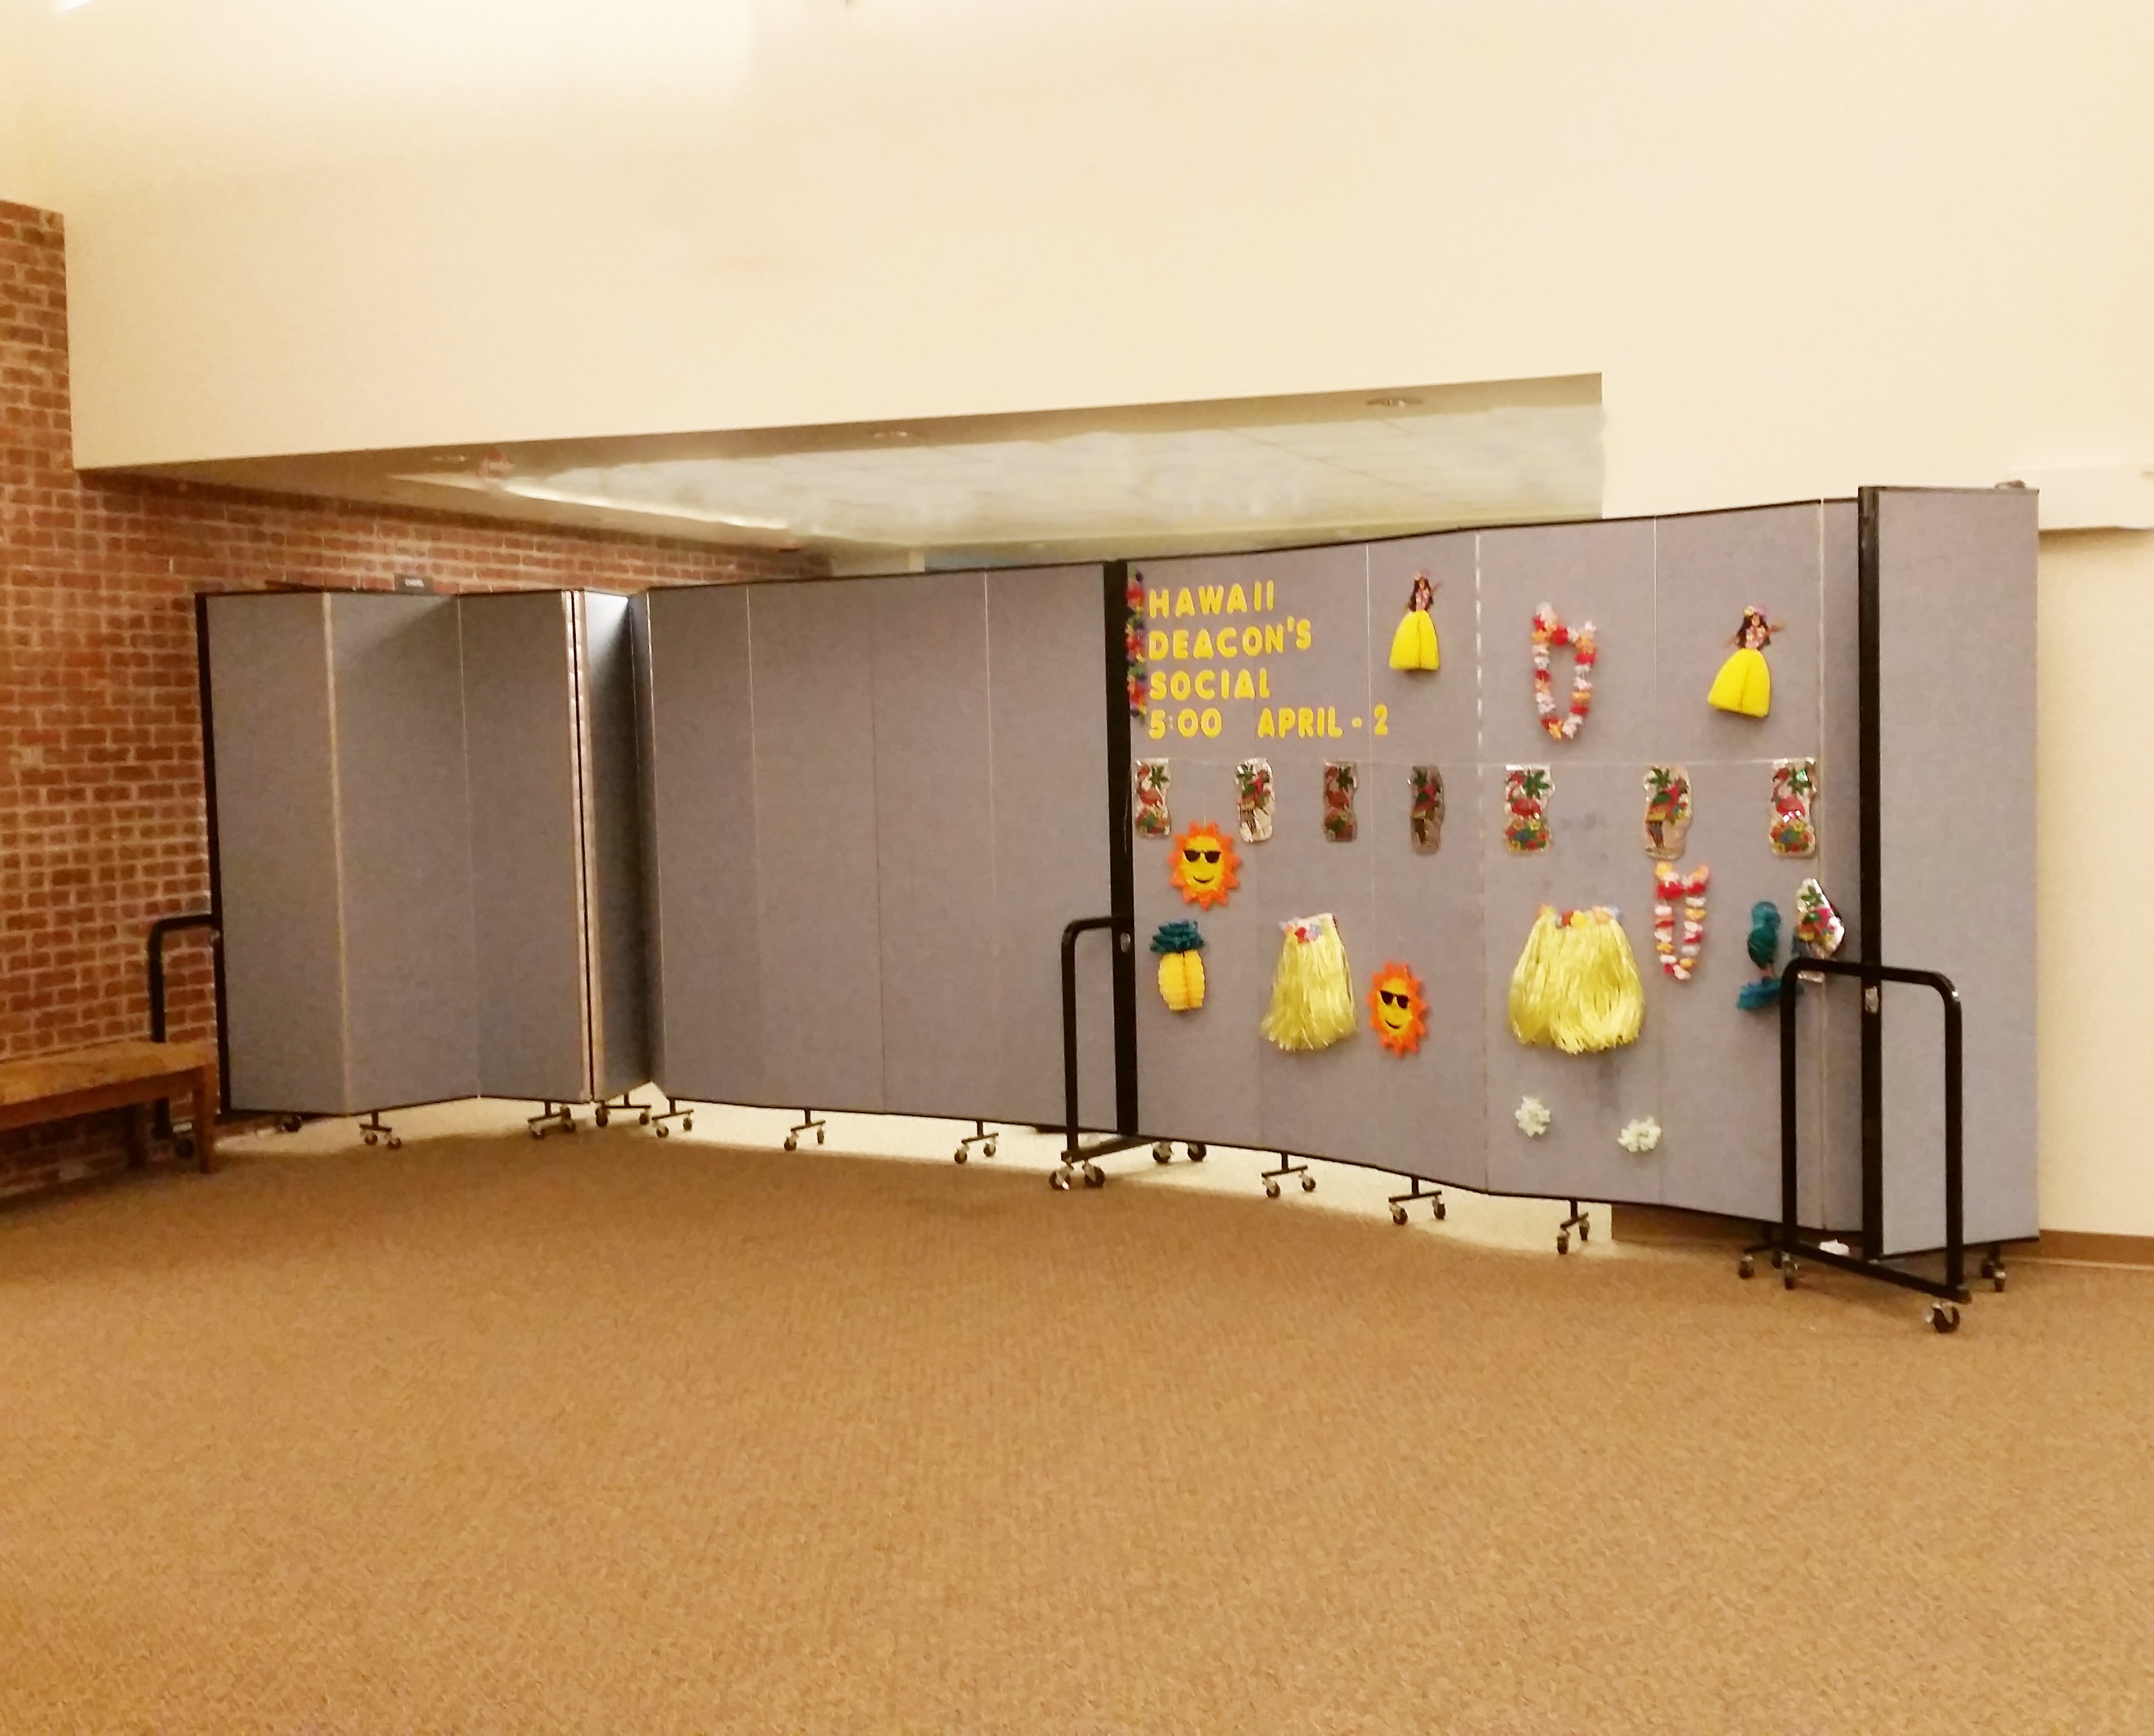 A portable partition is used to create more classrooms in a church hallway